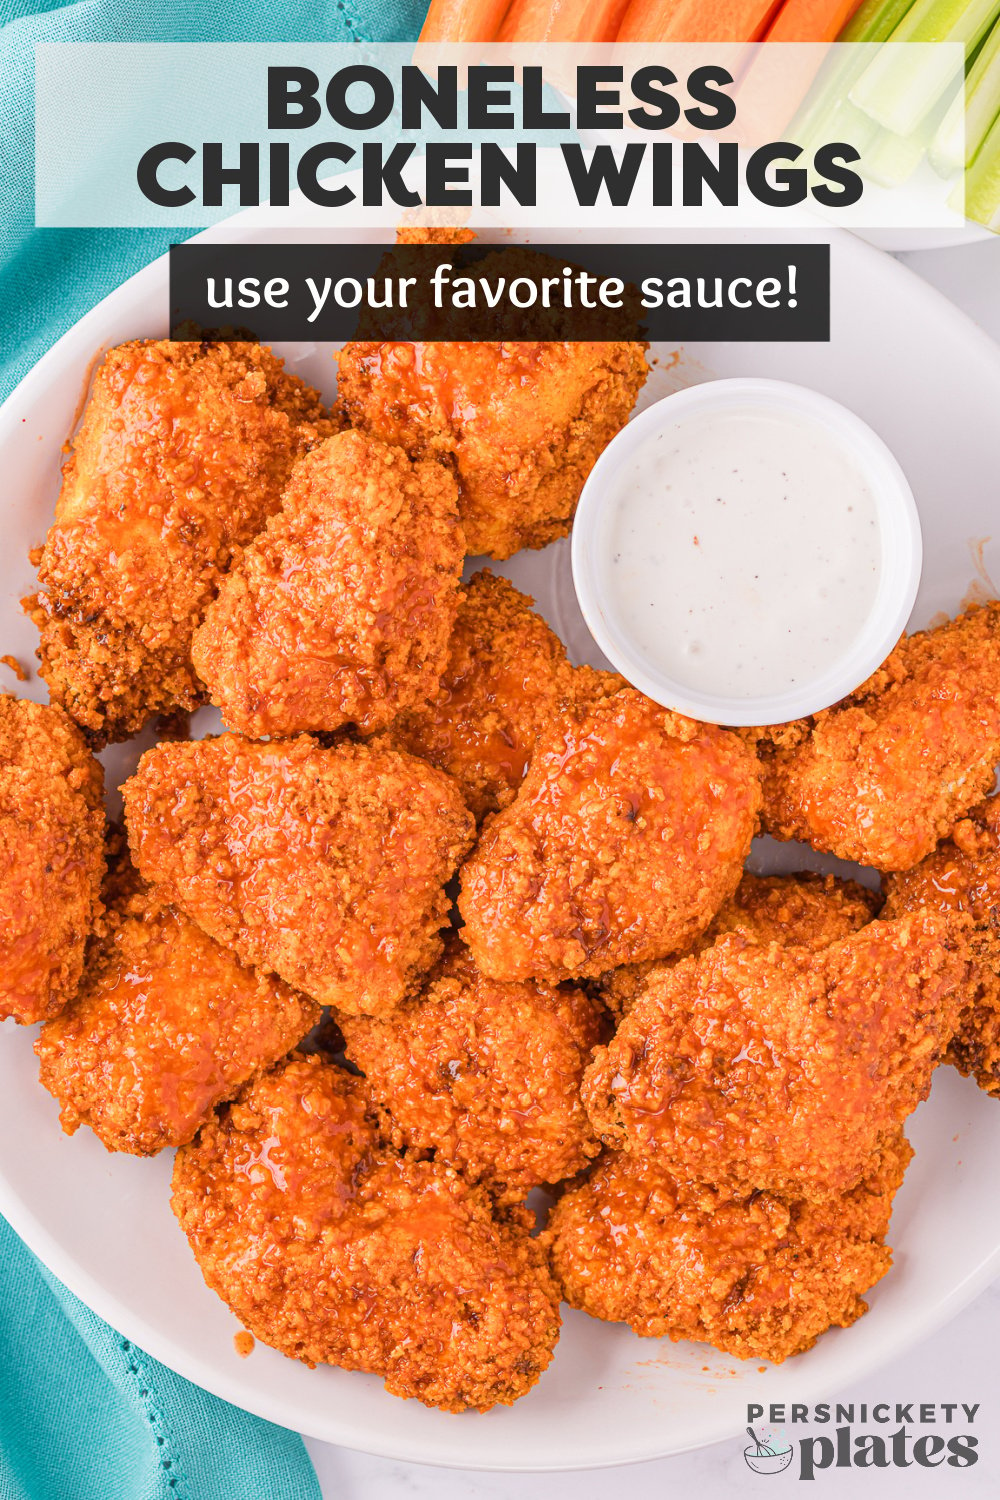 These easy boneless chicken wings are lightly breaded with panko bread crumbs and then fried - either on the stovetop or in the air fryer - until golden brown. Toss them in your favorite sauce and enjoy! | www.persnicketyplates.com